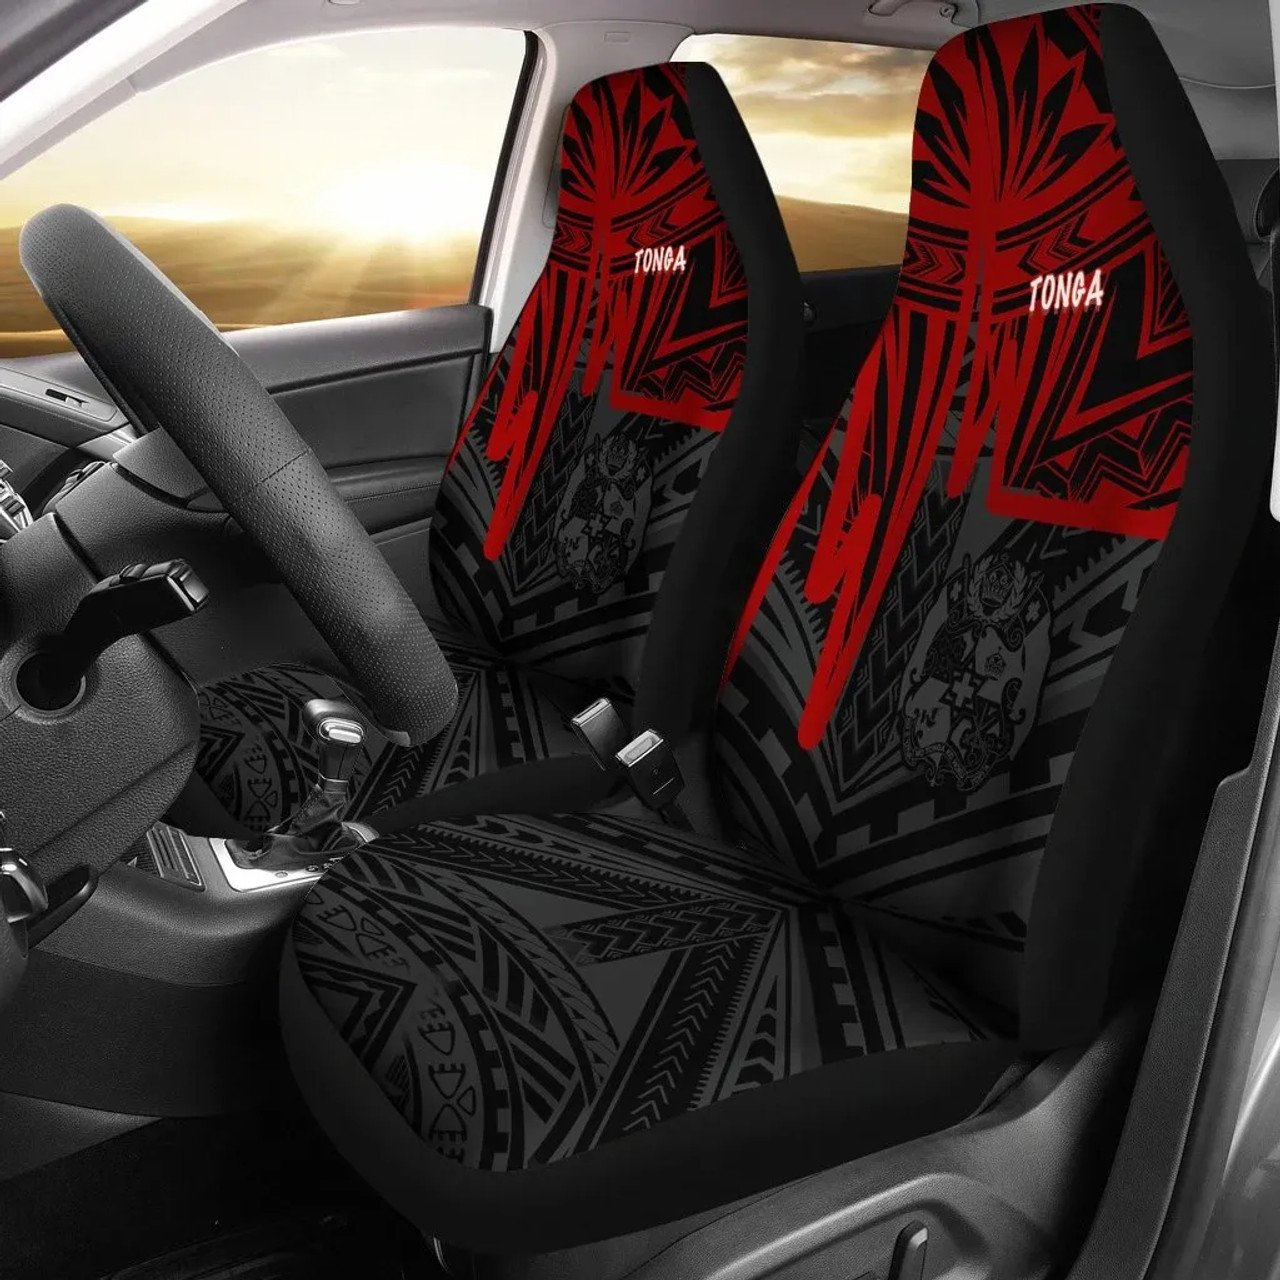 Tonga Car Seat Covers - Tonga Seal In Heartbeat Patterns Style (Red)